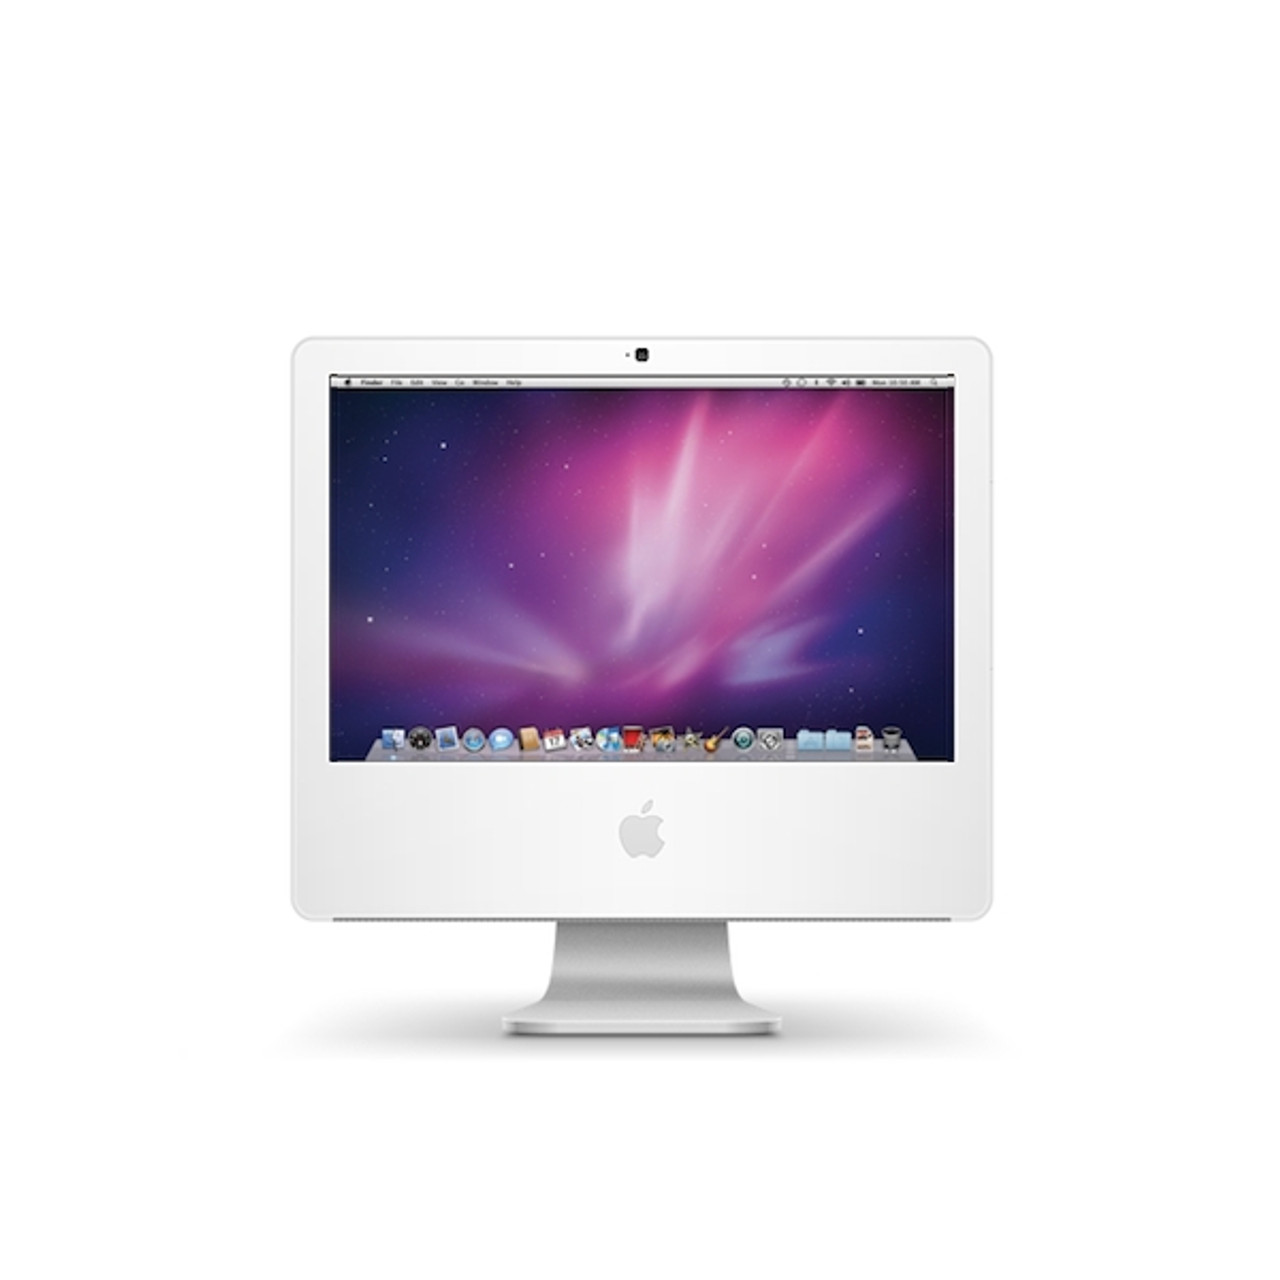 Apple iMac 20-inch, Early 2008 - 2.4GHz Core 2 Duo AIO